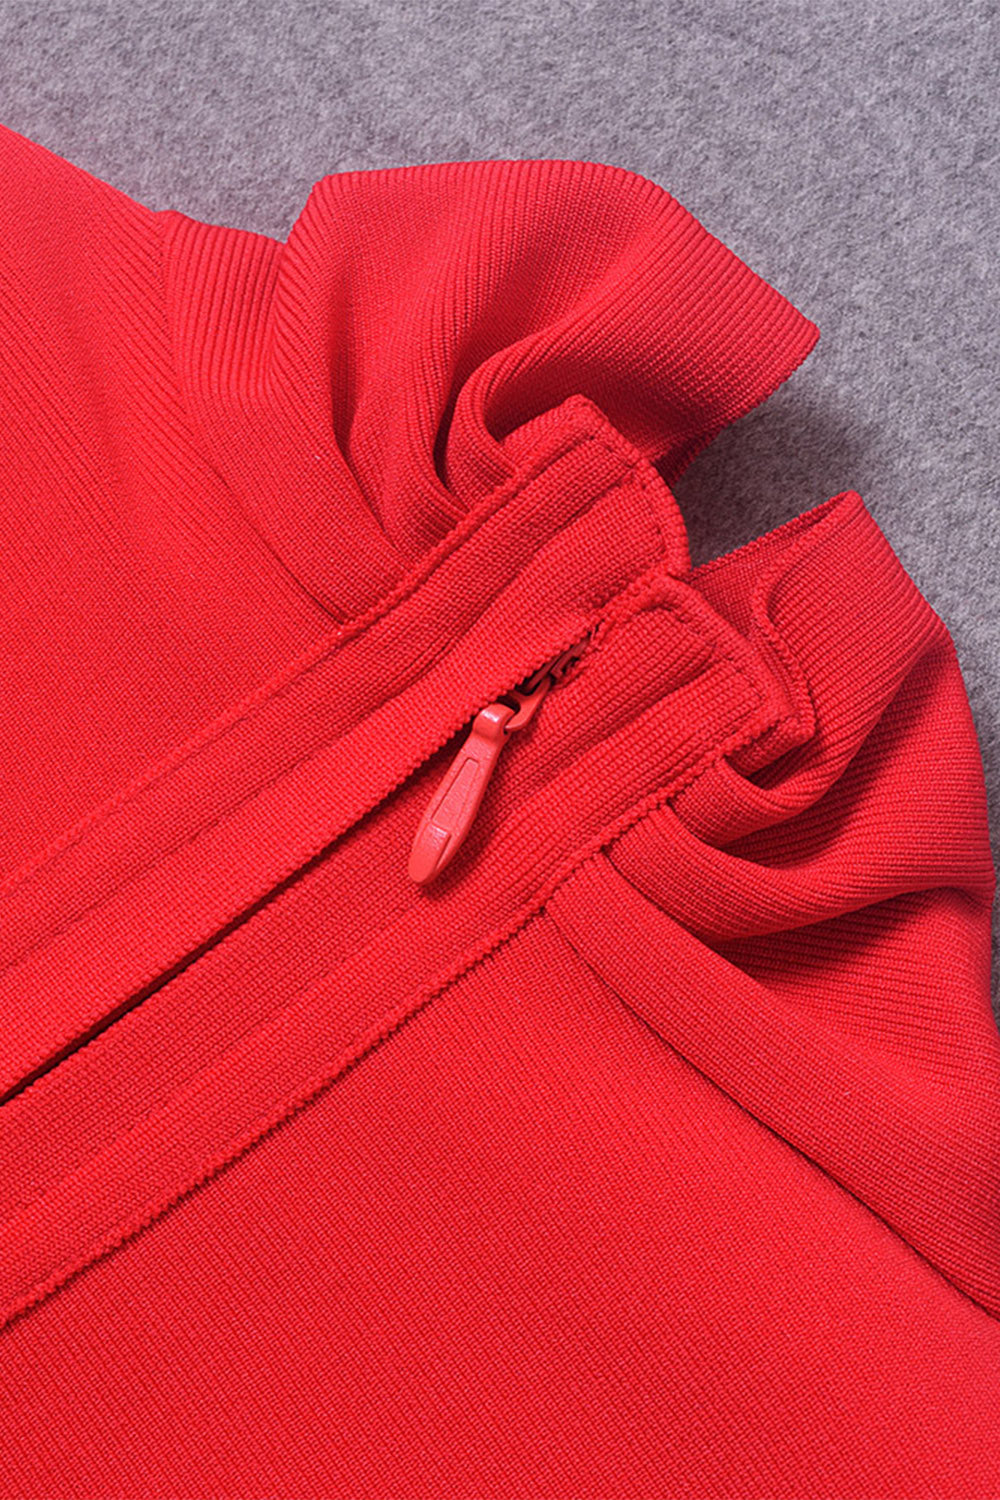 red bandage dress, red bodycon dress, cocktail dress, bandage dress for women, knee length bandage dress, long sleeve bandage dress, v neck bandage dress, wedding dress, event dress, party dress, prom dress